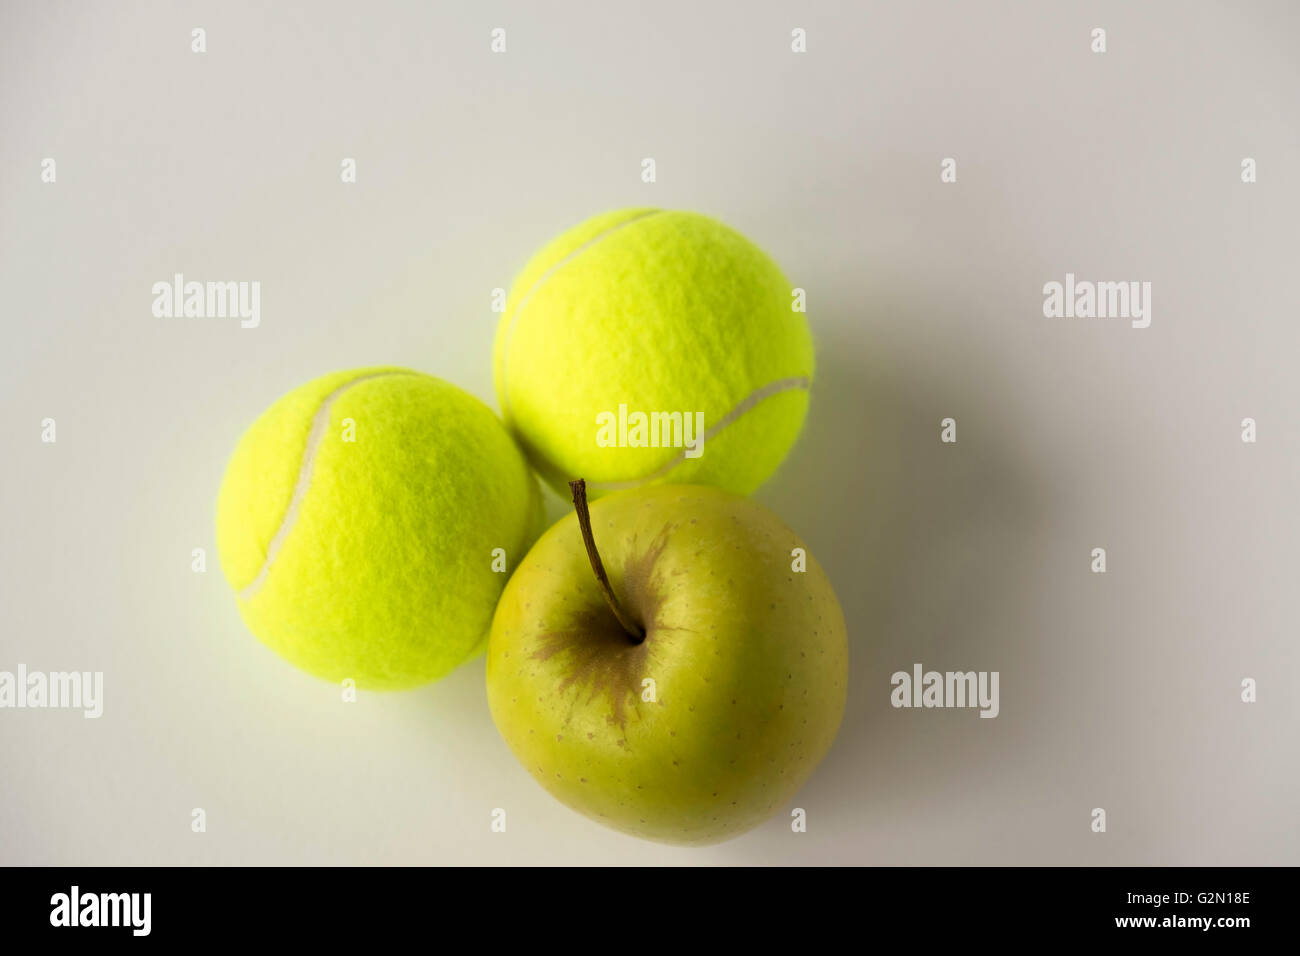 Golden apple with two tennis balls on white background Stock Photo